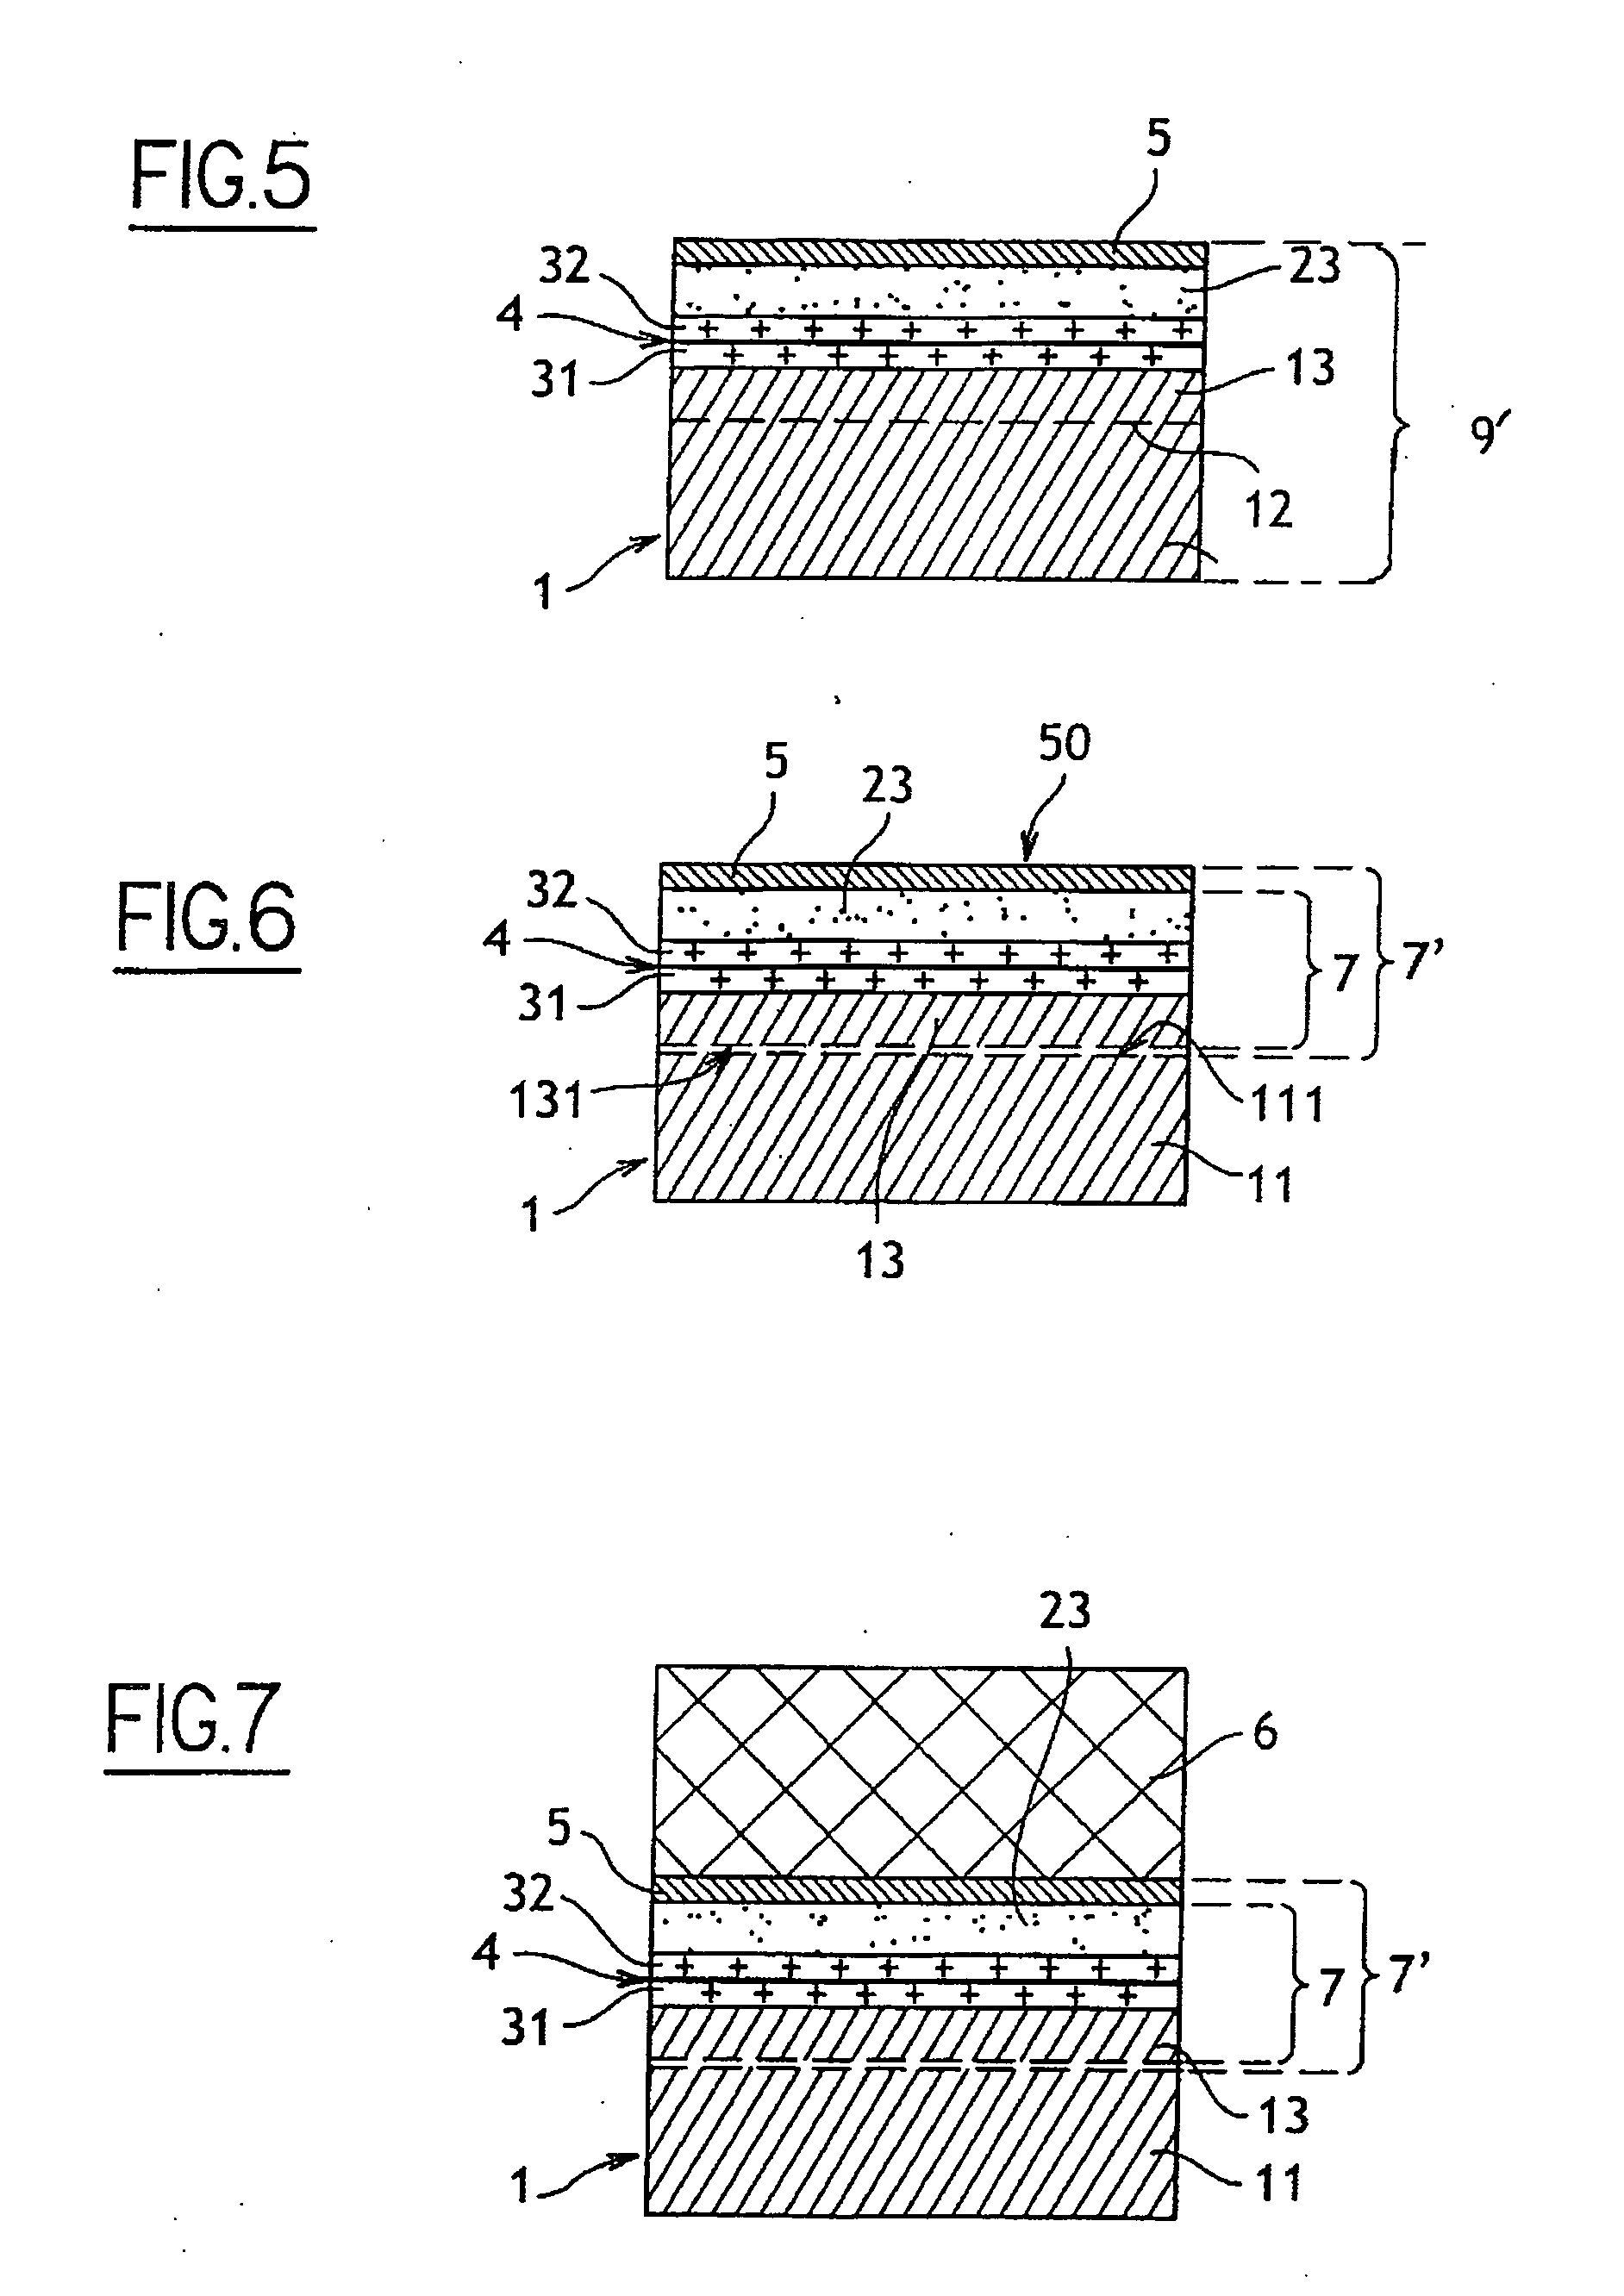 Method of fabricating an epitaxially grown layer